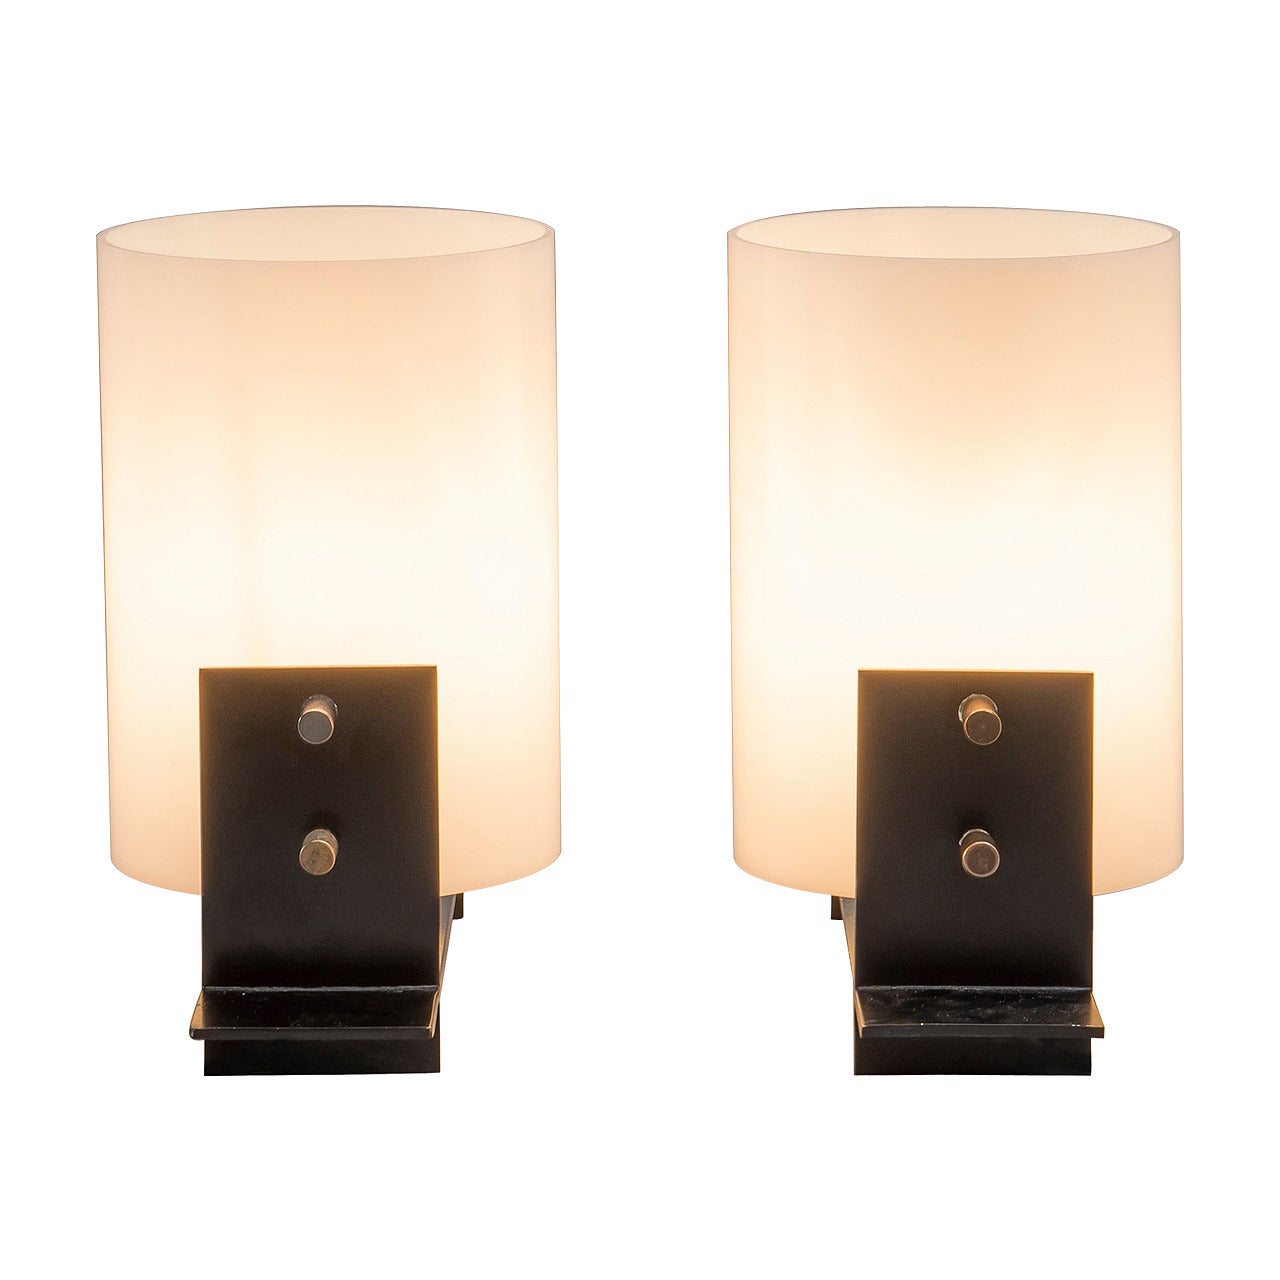 Pair of Table Lamps by Georges Frydman, E.F.A. edition, 1958-1959 For Sale